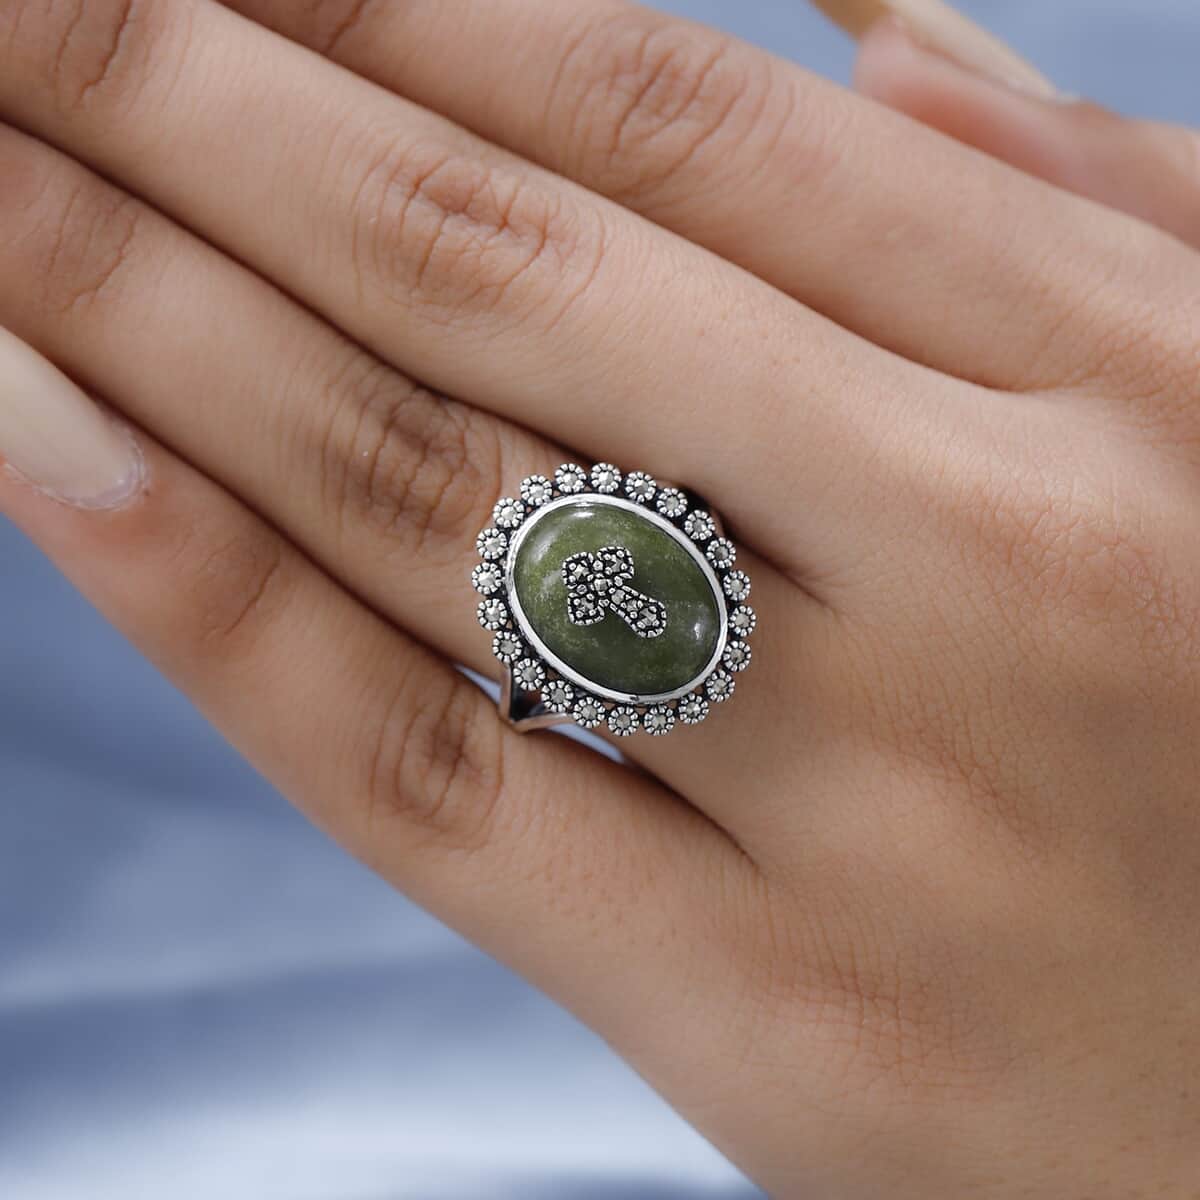 Connemara Marble and Swiss Marcasite Ring in Sterling Silver 7.65 ctw (Delivery in 3-5 Business Days) image number 2